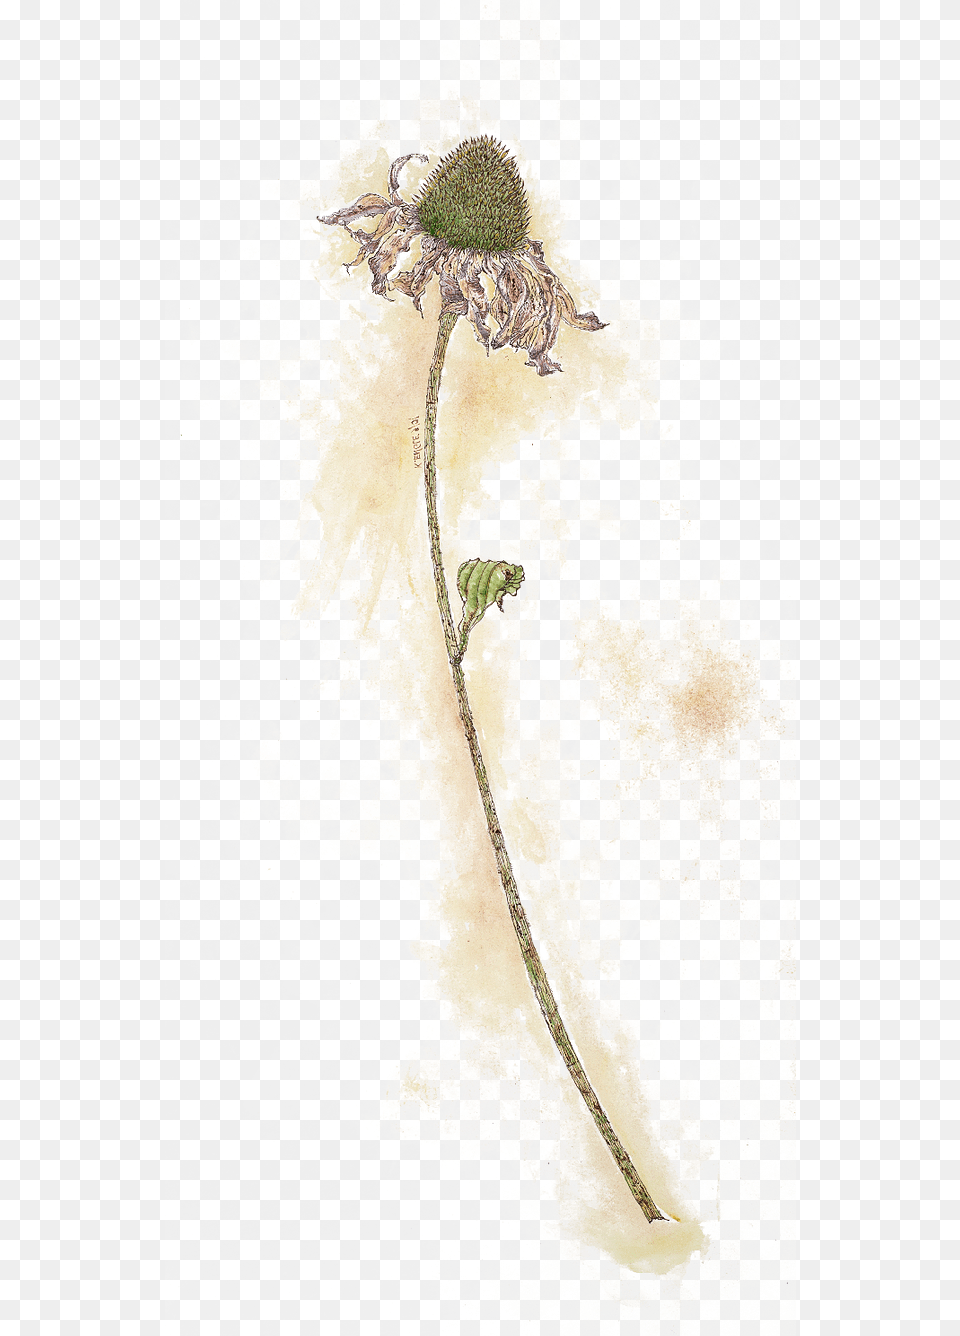 Continue Perusing Portable Network Graphics, Flower, Plant Png